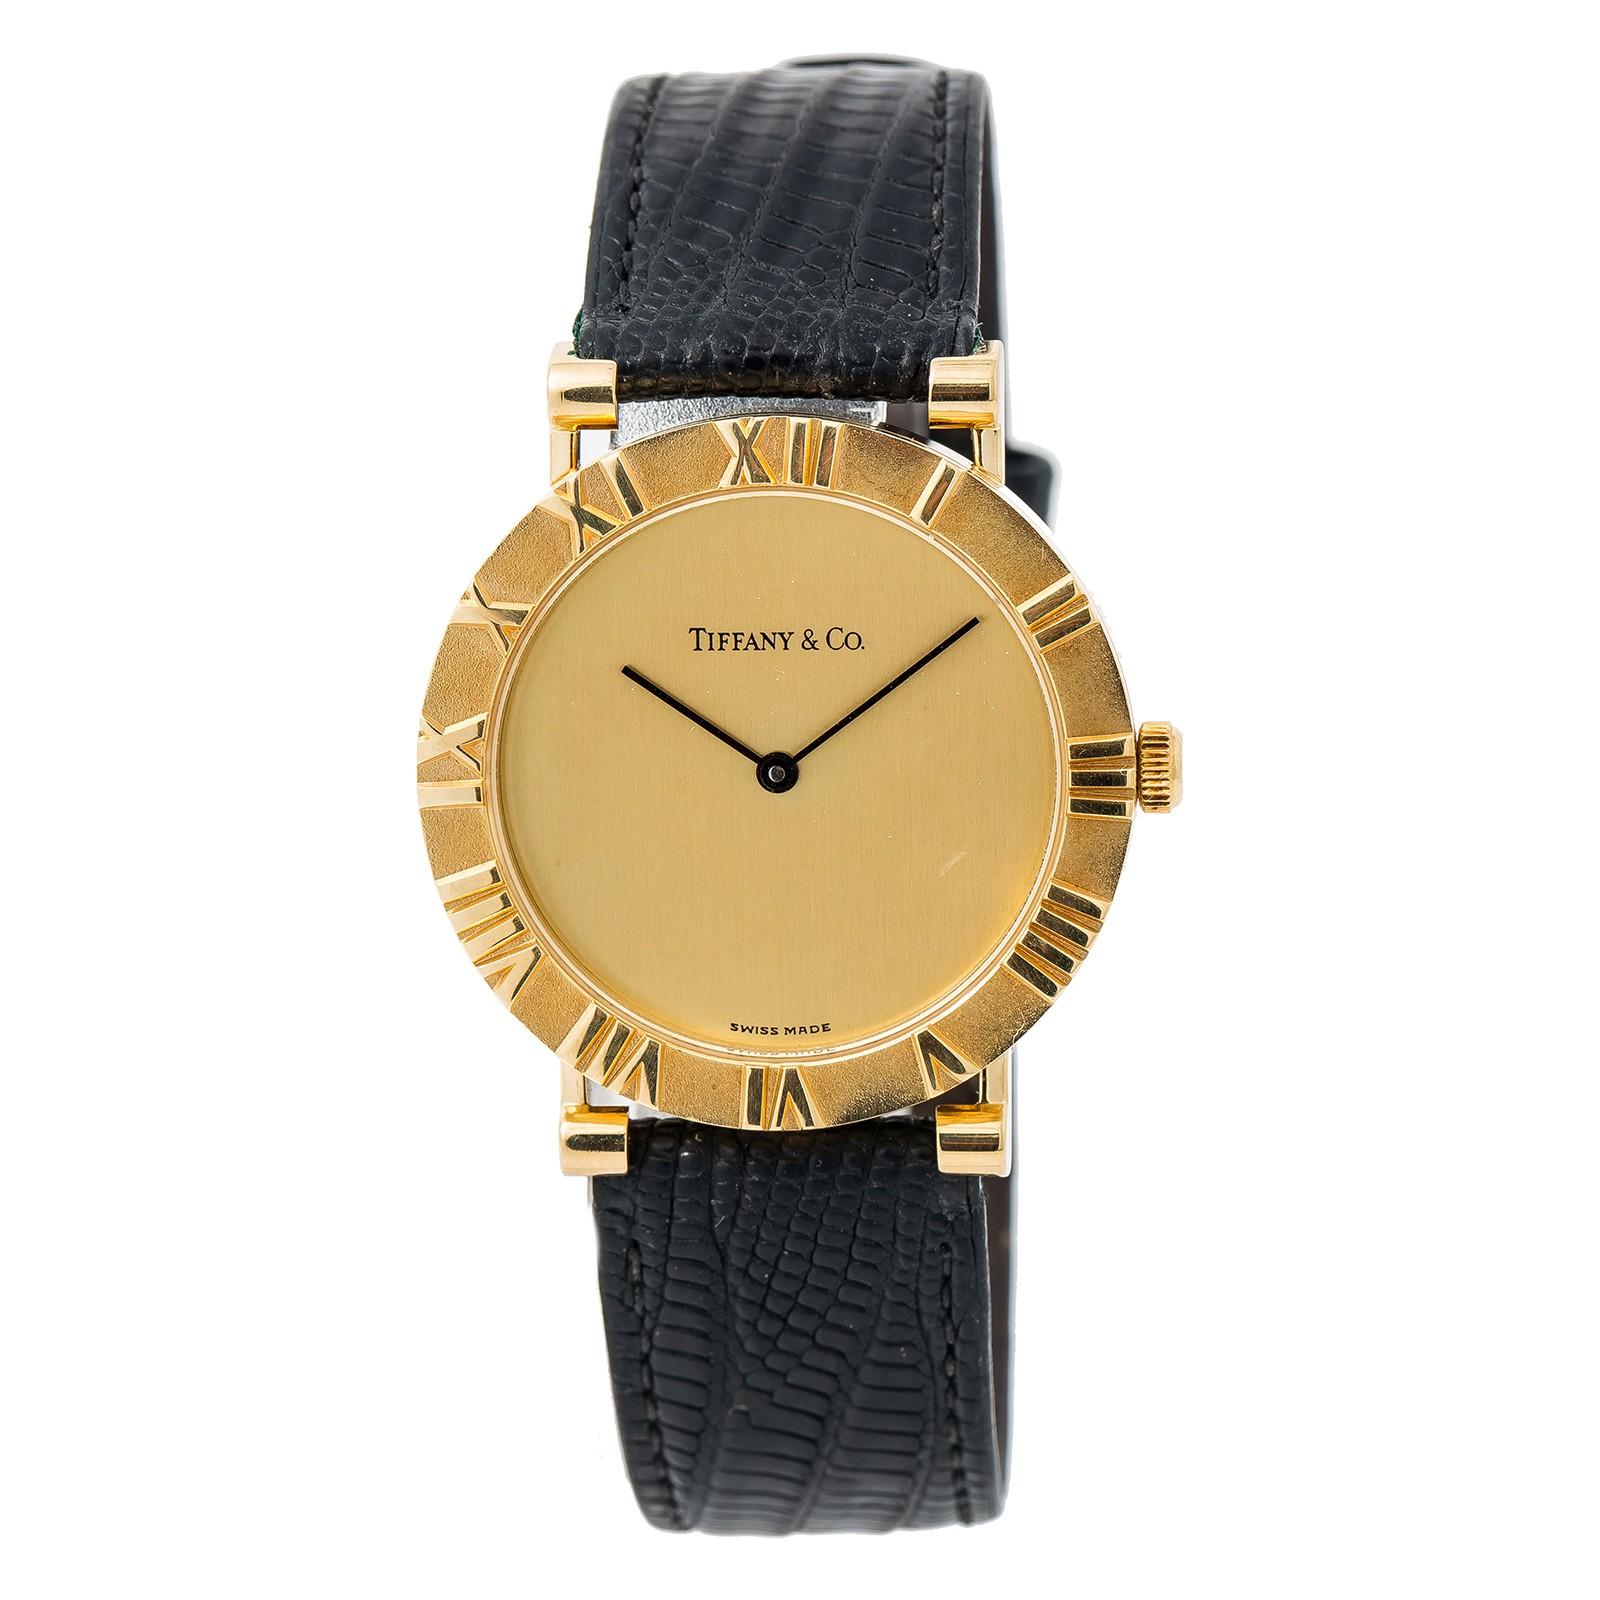 Tiffany & Co. Atlas M0630 With 7 mm Band, Yellow-Gold Bezel & Gold Dial